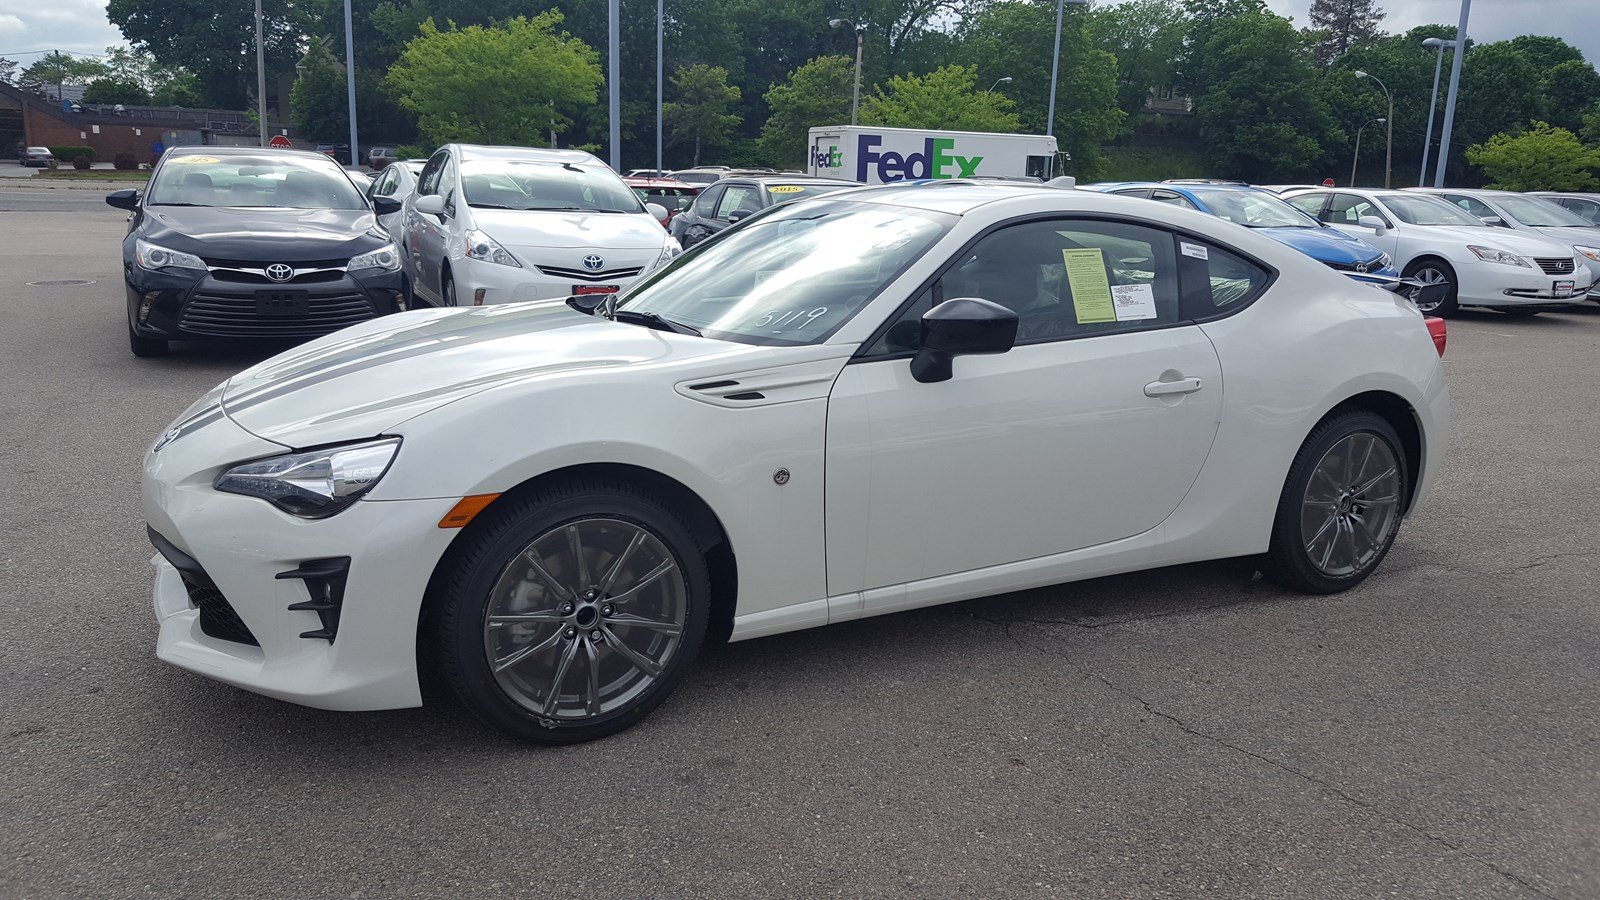 New 2017 Toyota 86 860 Special Edition 2dr Car in Boston #19003